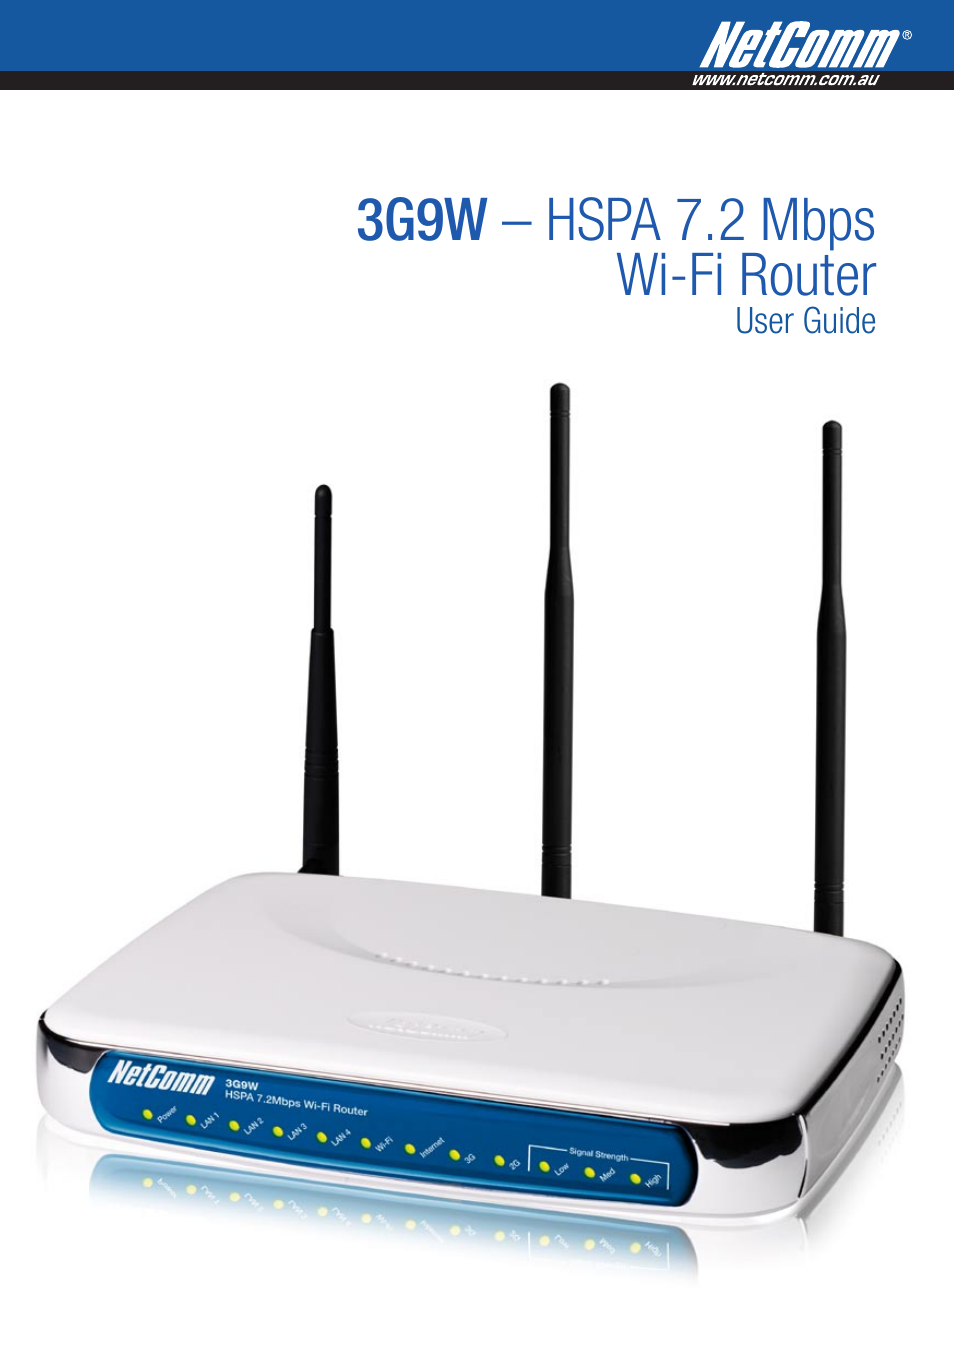 HSPA 7.2 MBPS WI-FI ROUTER 3G9W